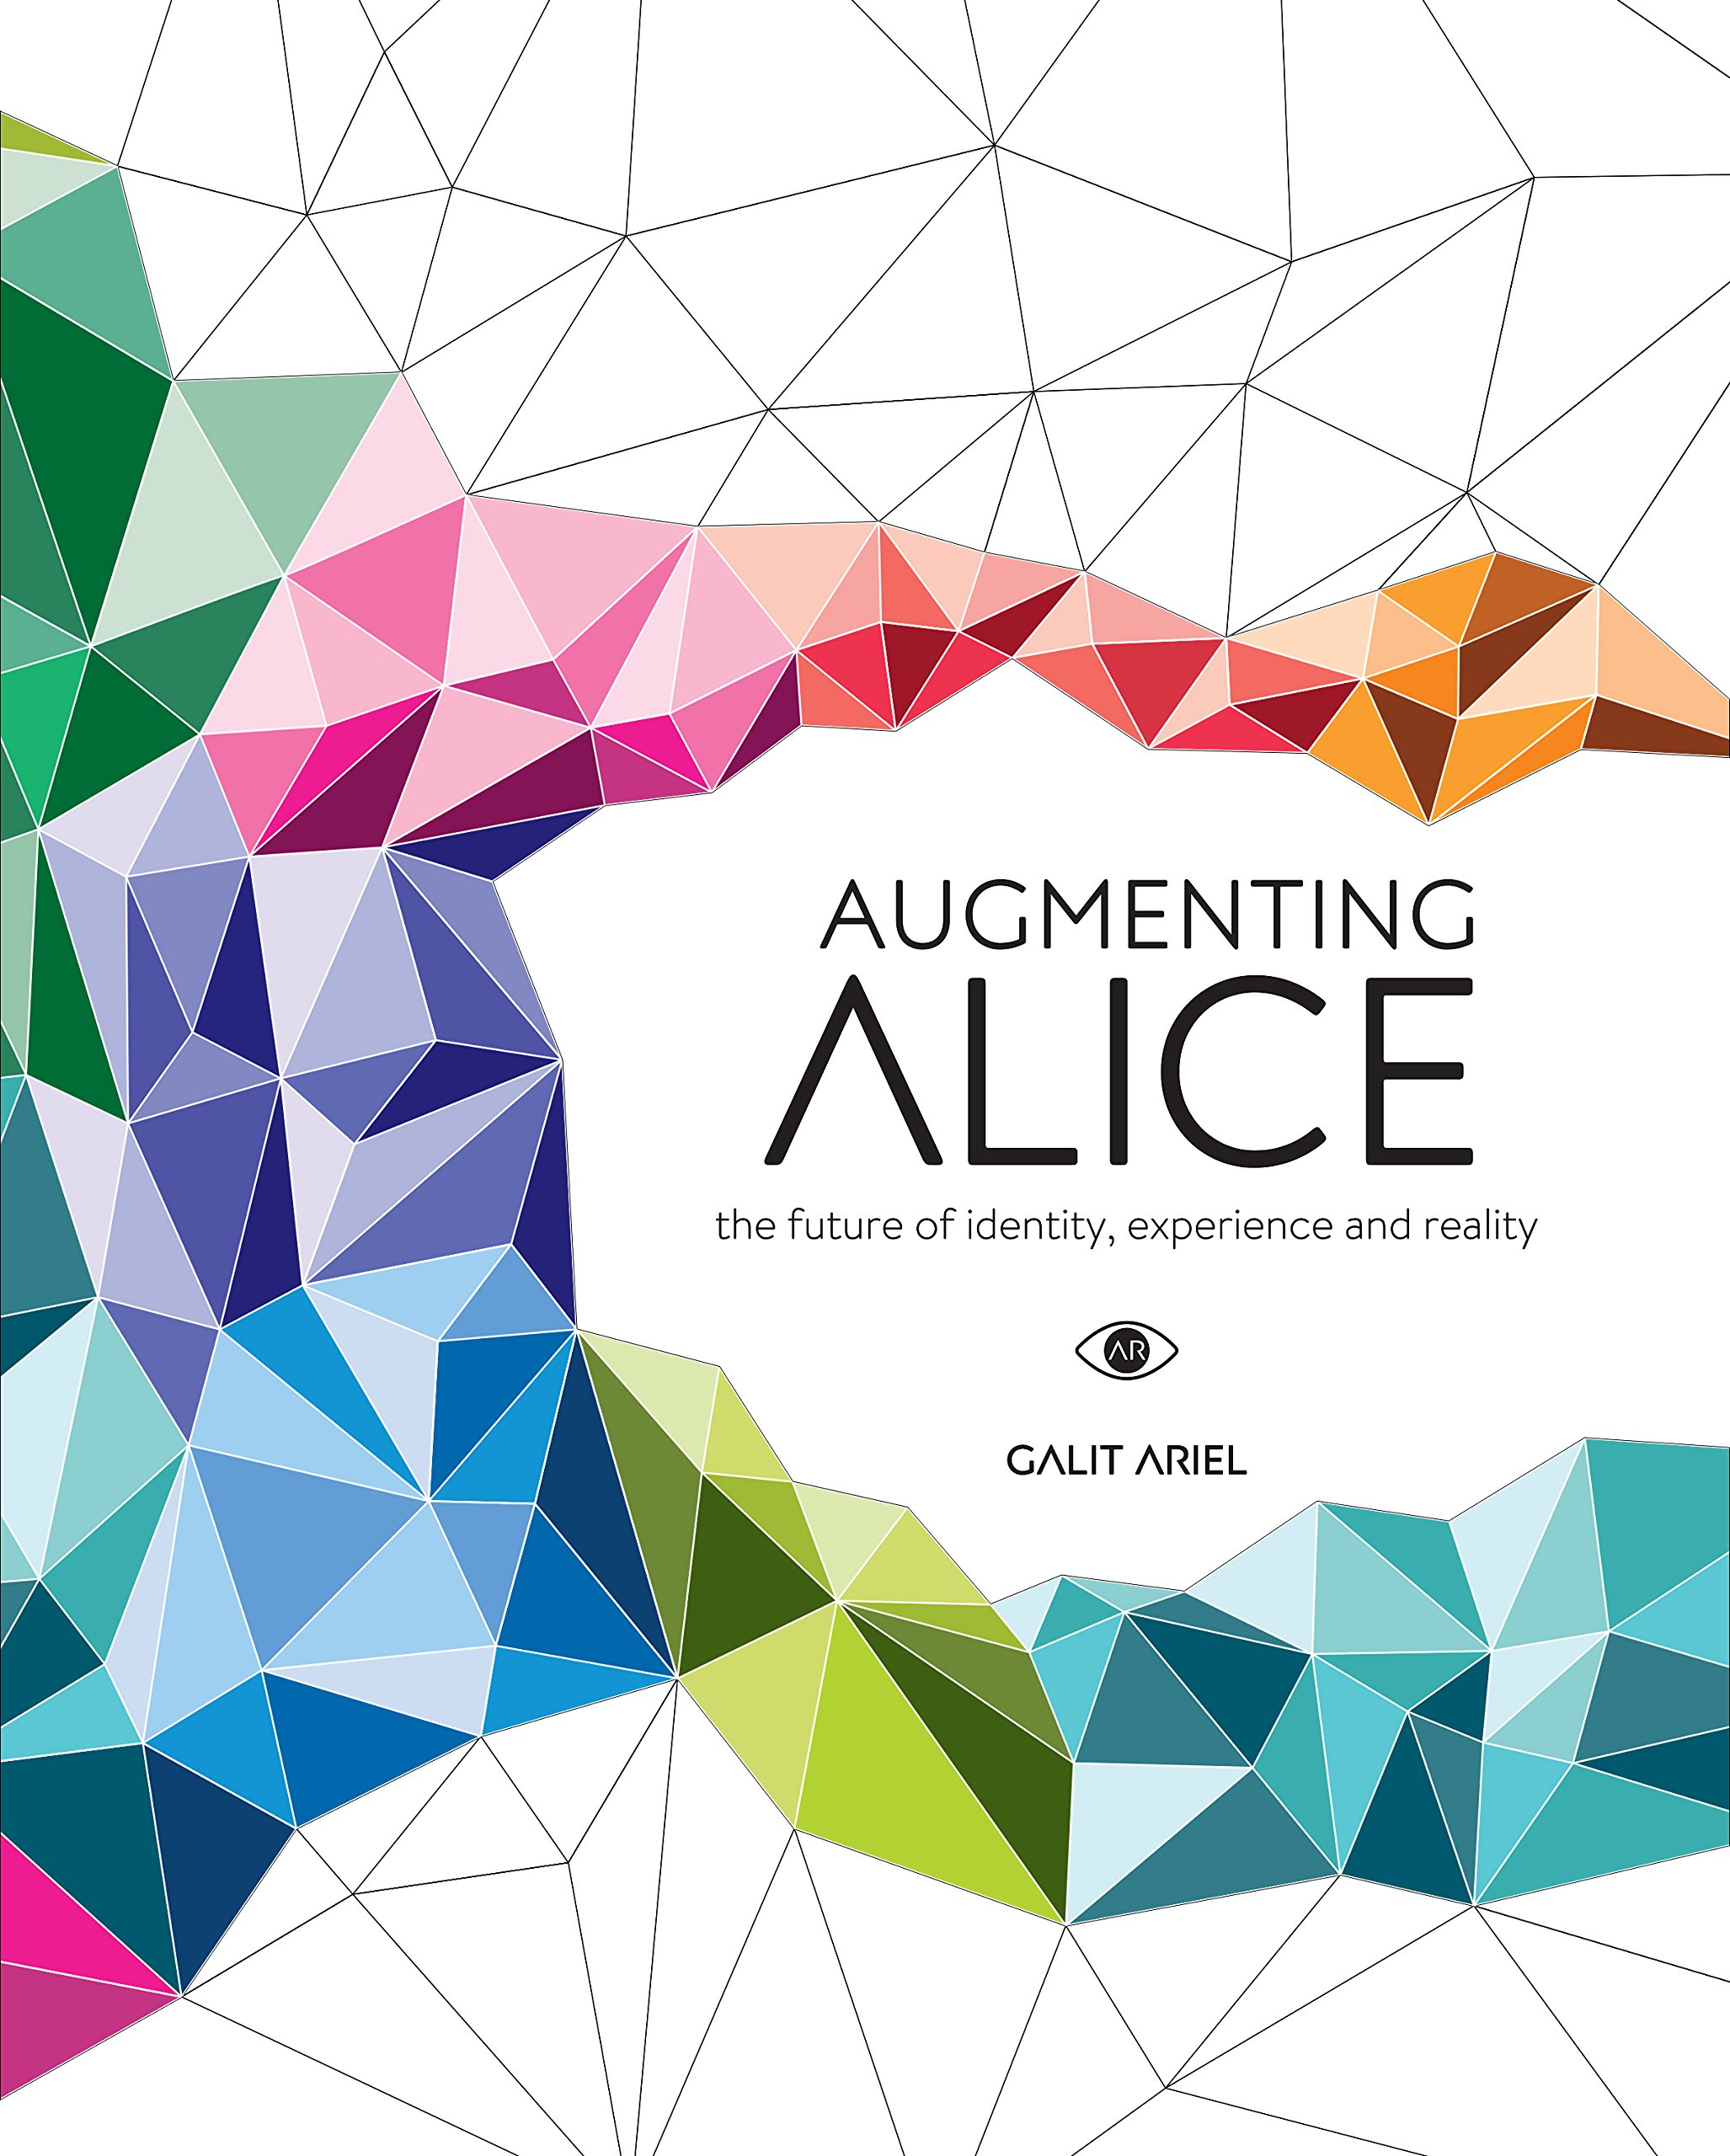 Augmenting Alice - The future of identity, experience and reality | Galit Ariel